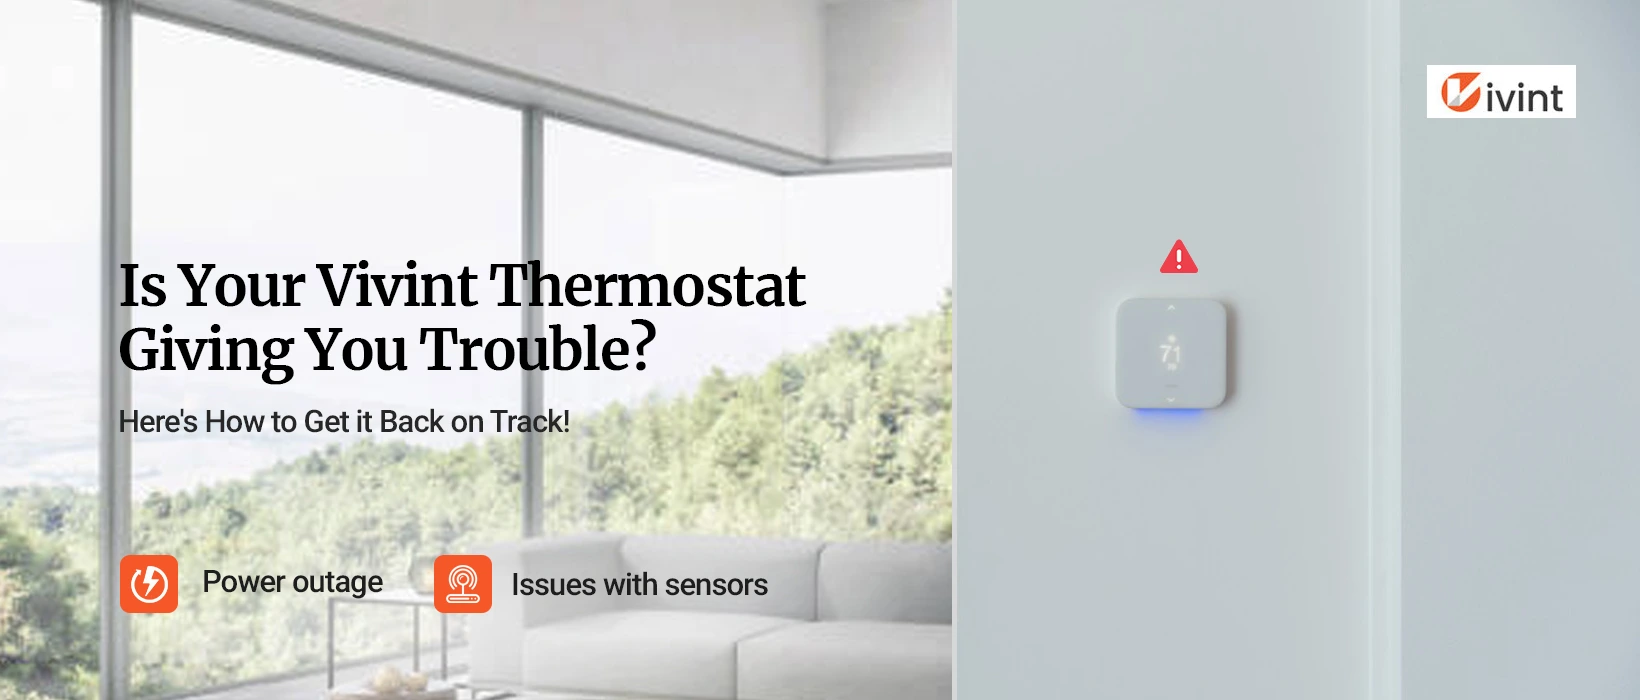 Vivint Thermostat Not Working. How to Fix it